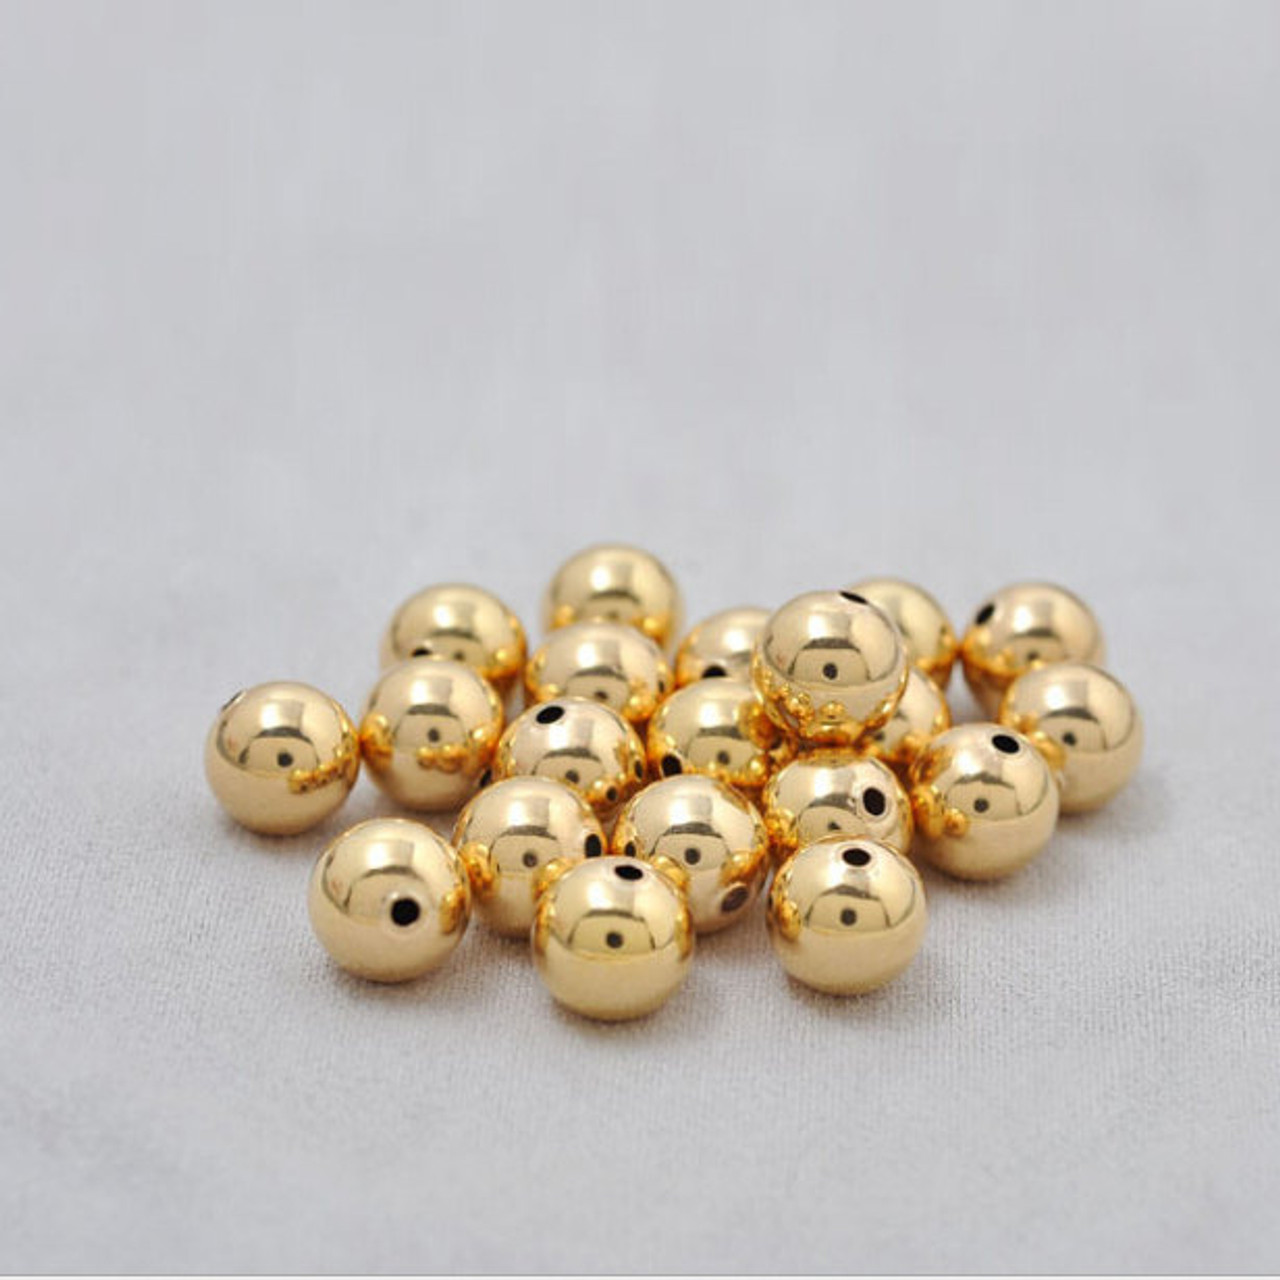 18K Gold Filled Cylindrical Spacer Beads,Polar Star Spacer Beads,North Star Spacer Beads,for DIY Jewelry Making